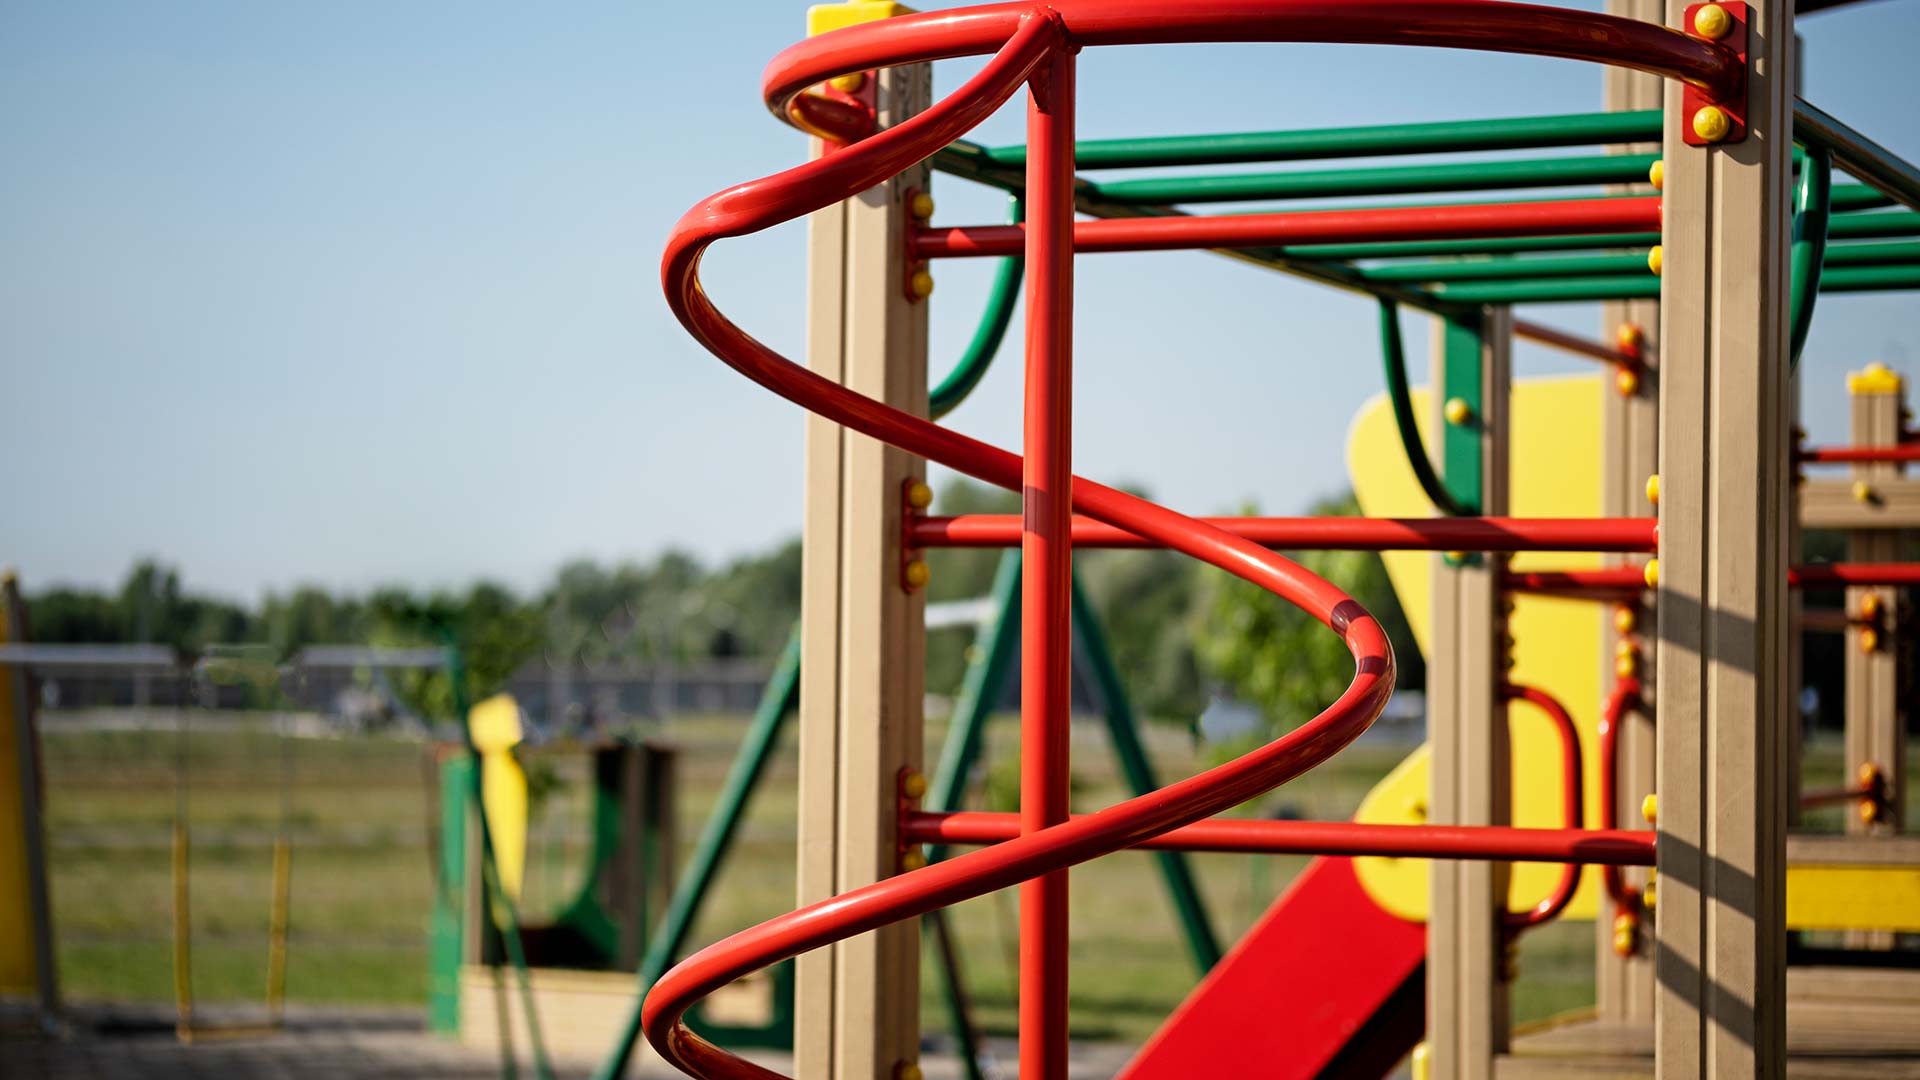 Are School Playgrounds Living Up to Parents' Expectations?